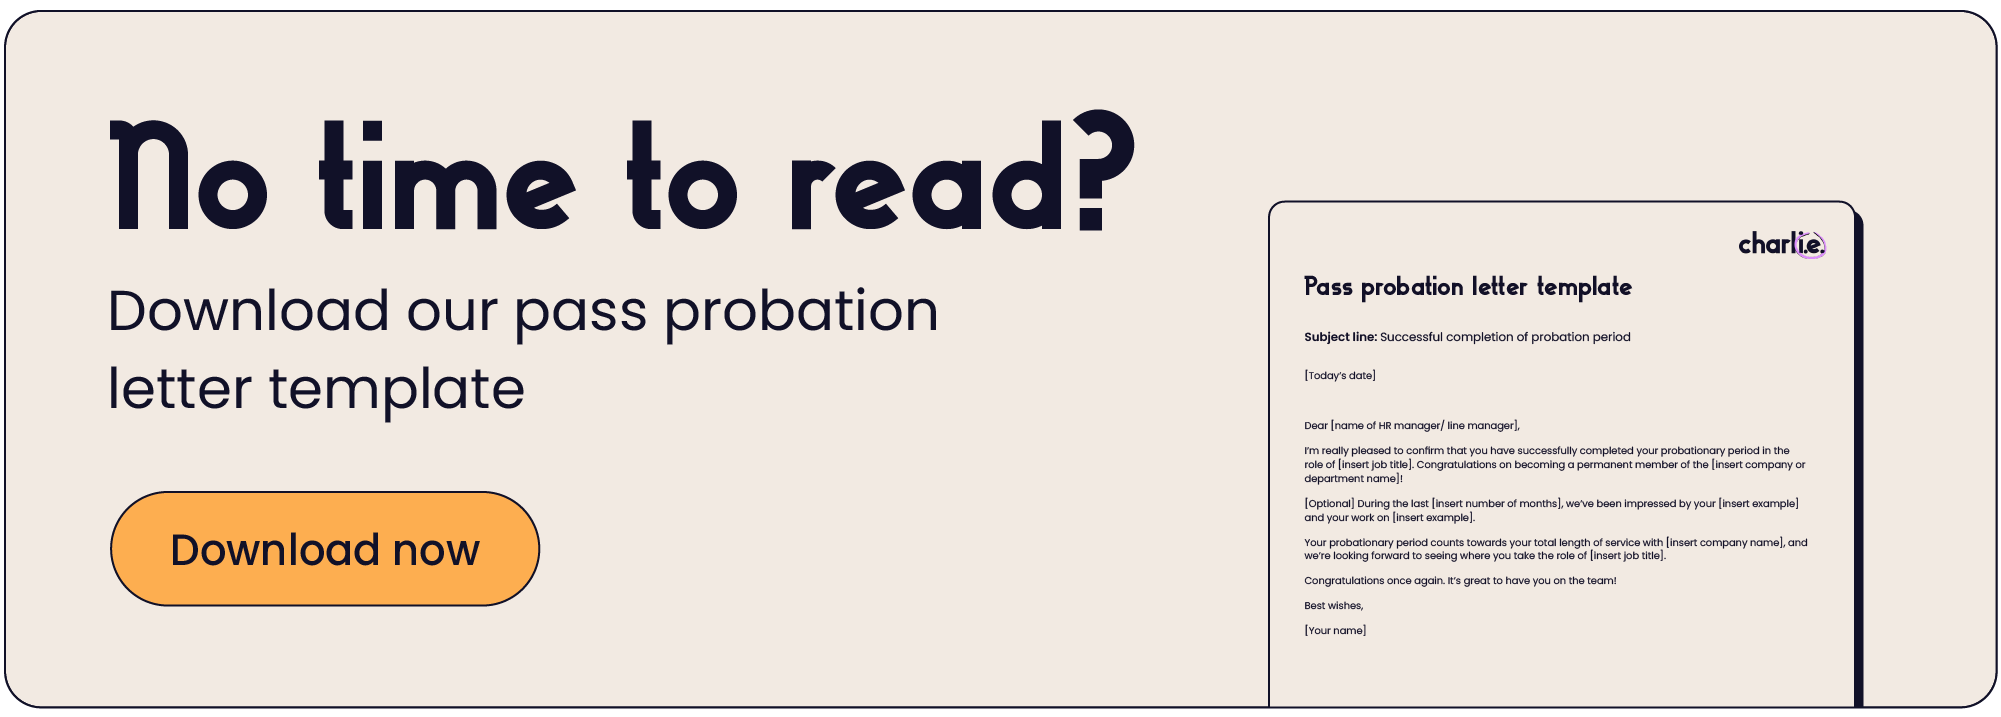 Download our pass probation letter template.webp